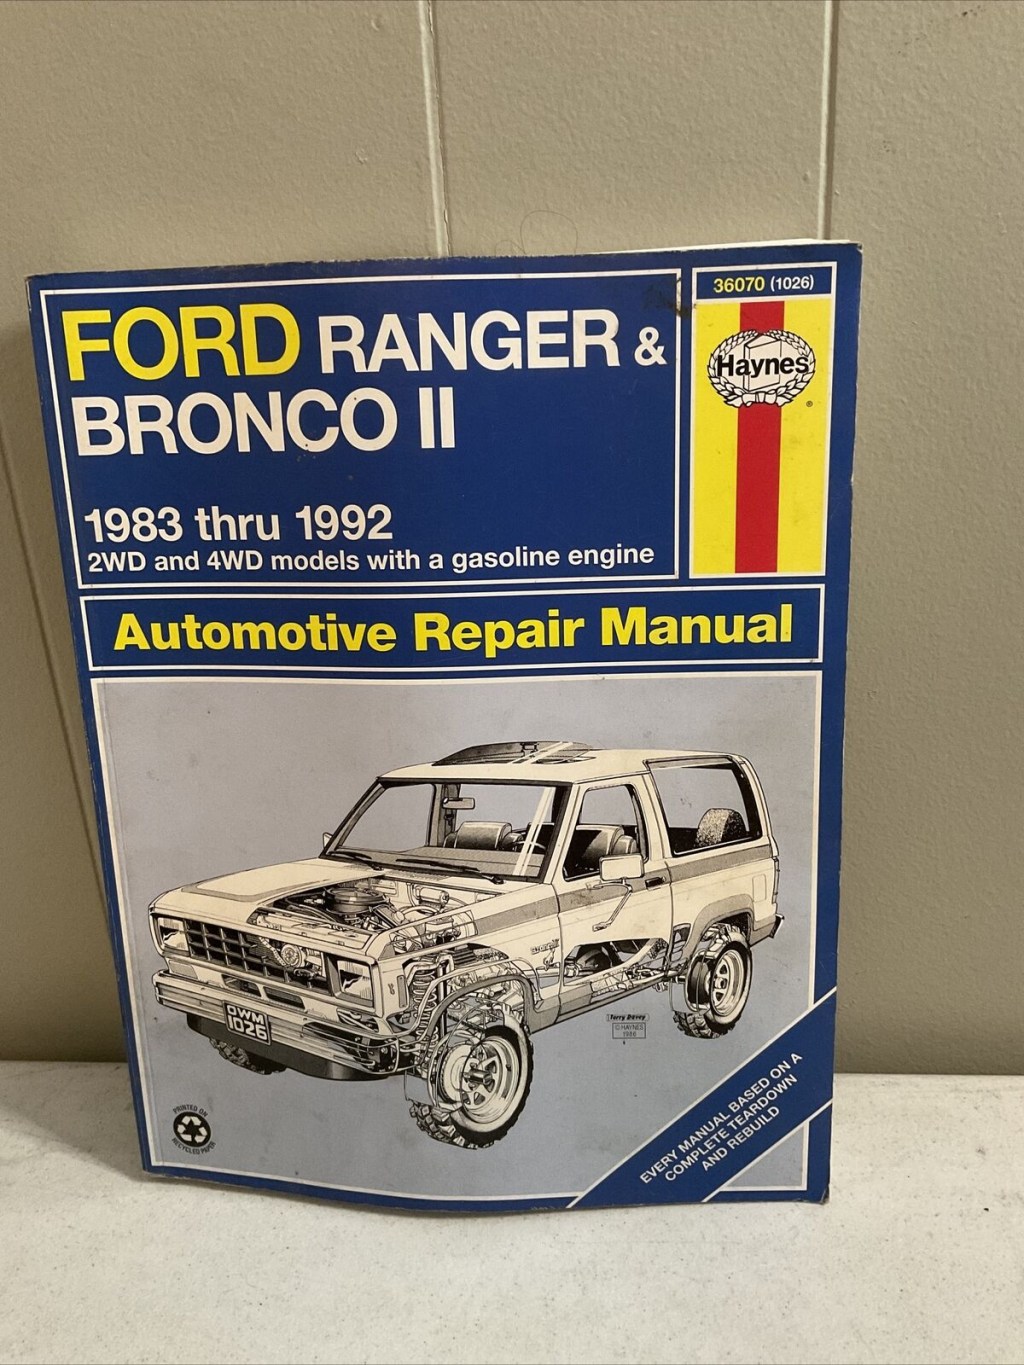 Picture of: Vintage Ford Ranger & Bronco II – Automobile Repair Manual